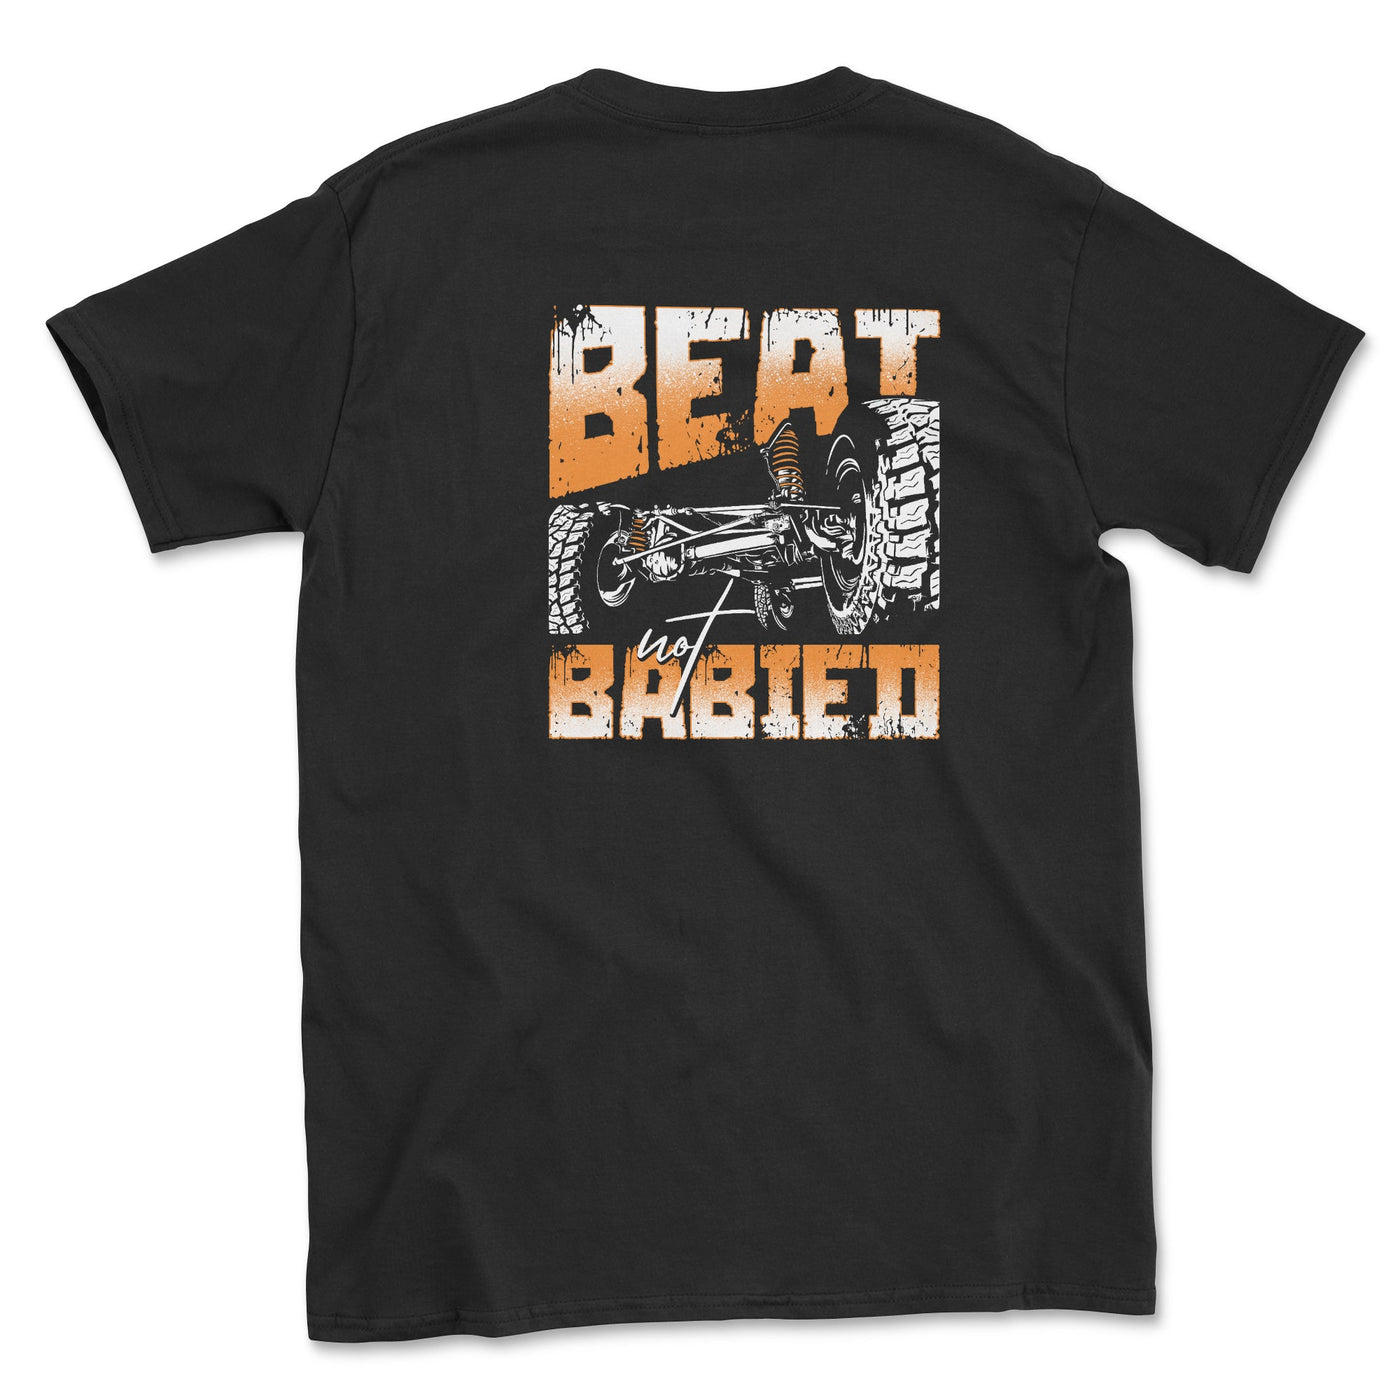 Big and Tall-Beat Not Babied 4x4 Graphic Tee - Goats Trail Off-Road Apparel Company